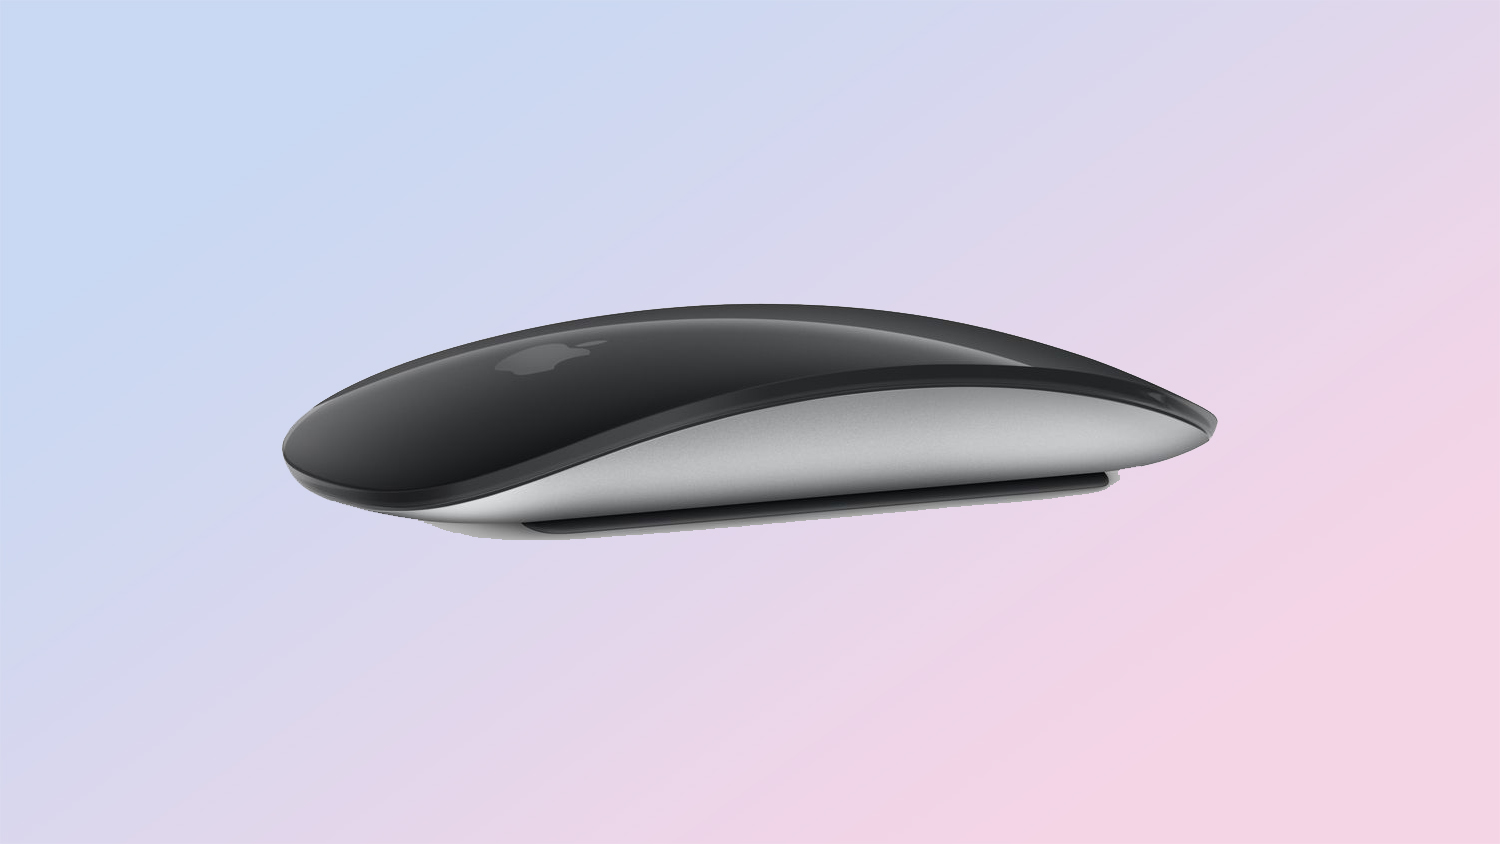 black apple magic mouse on lilac background